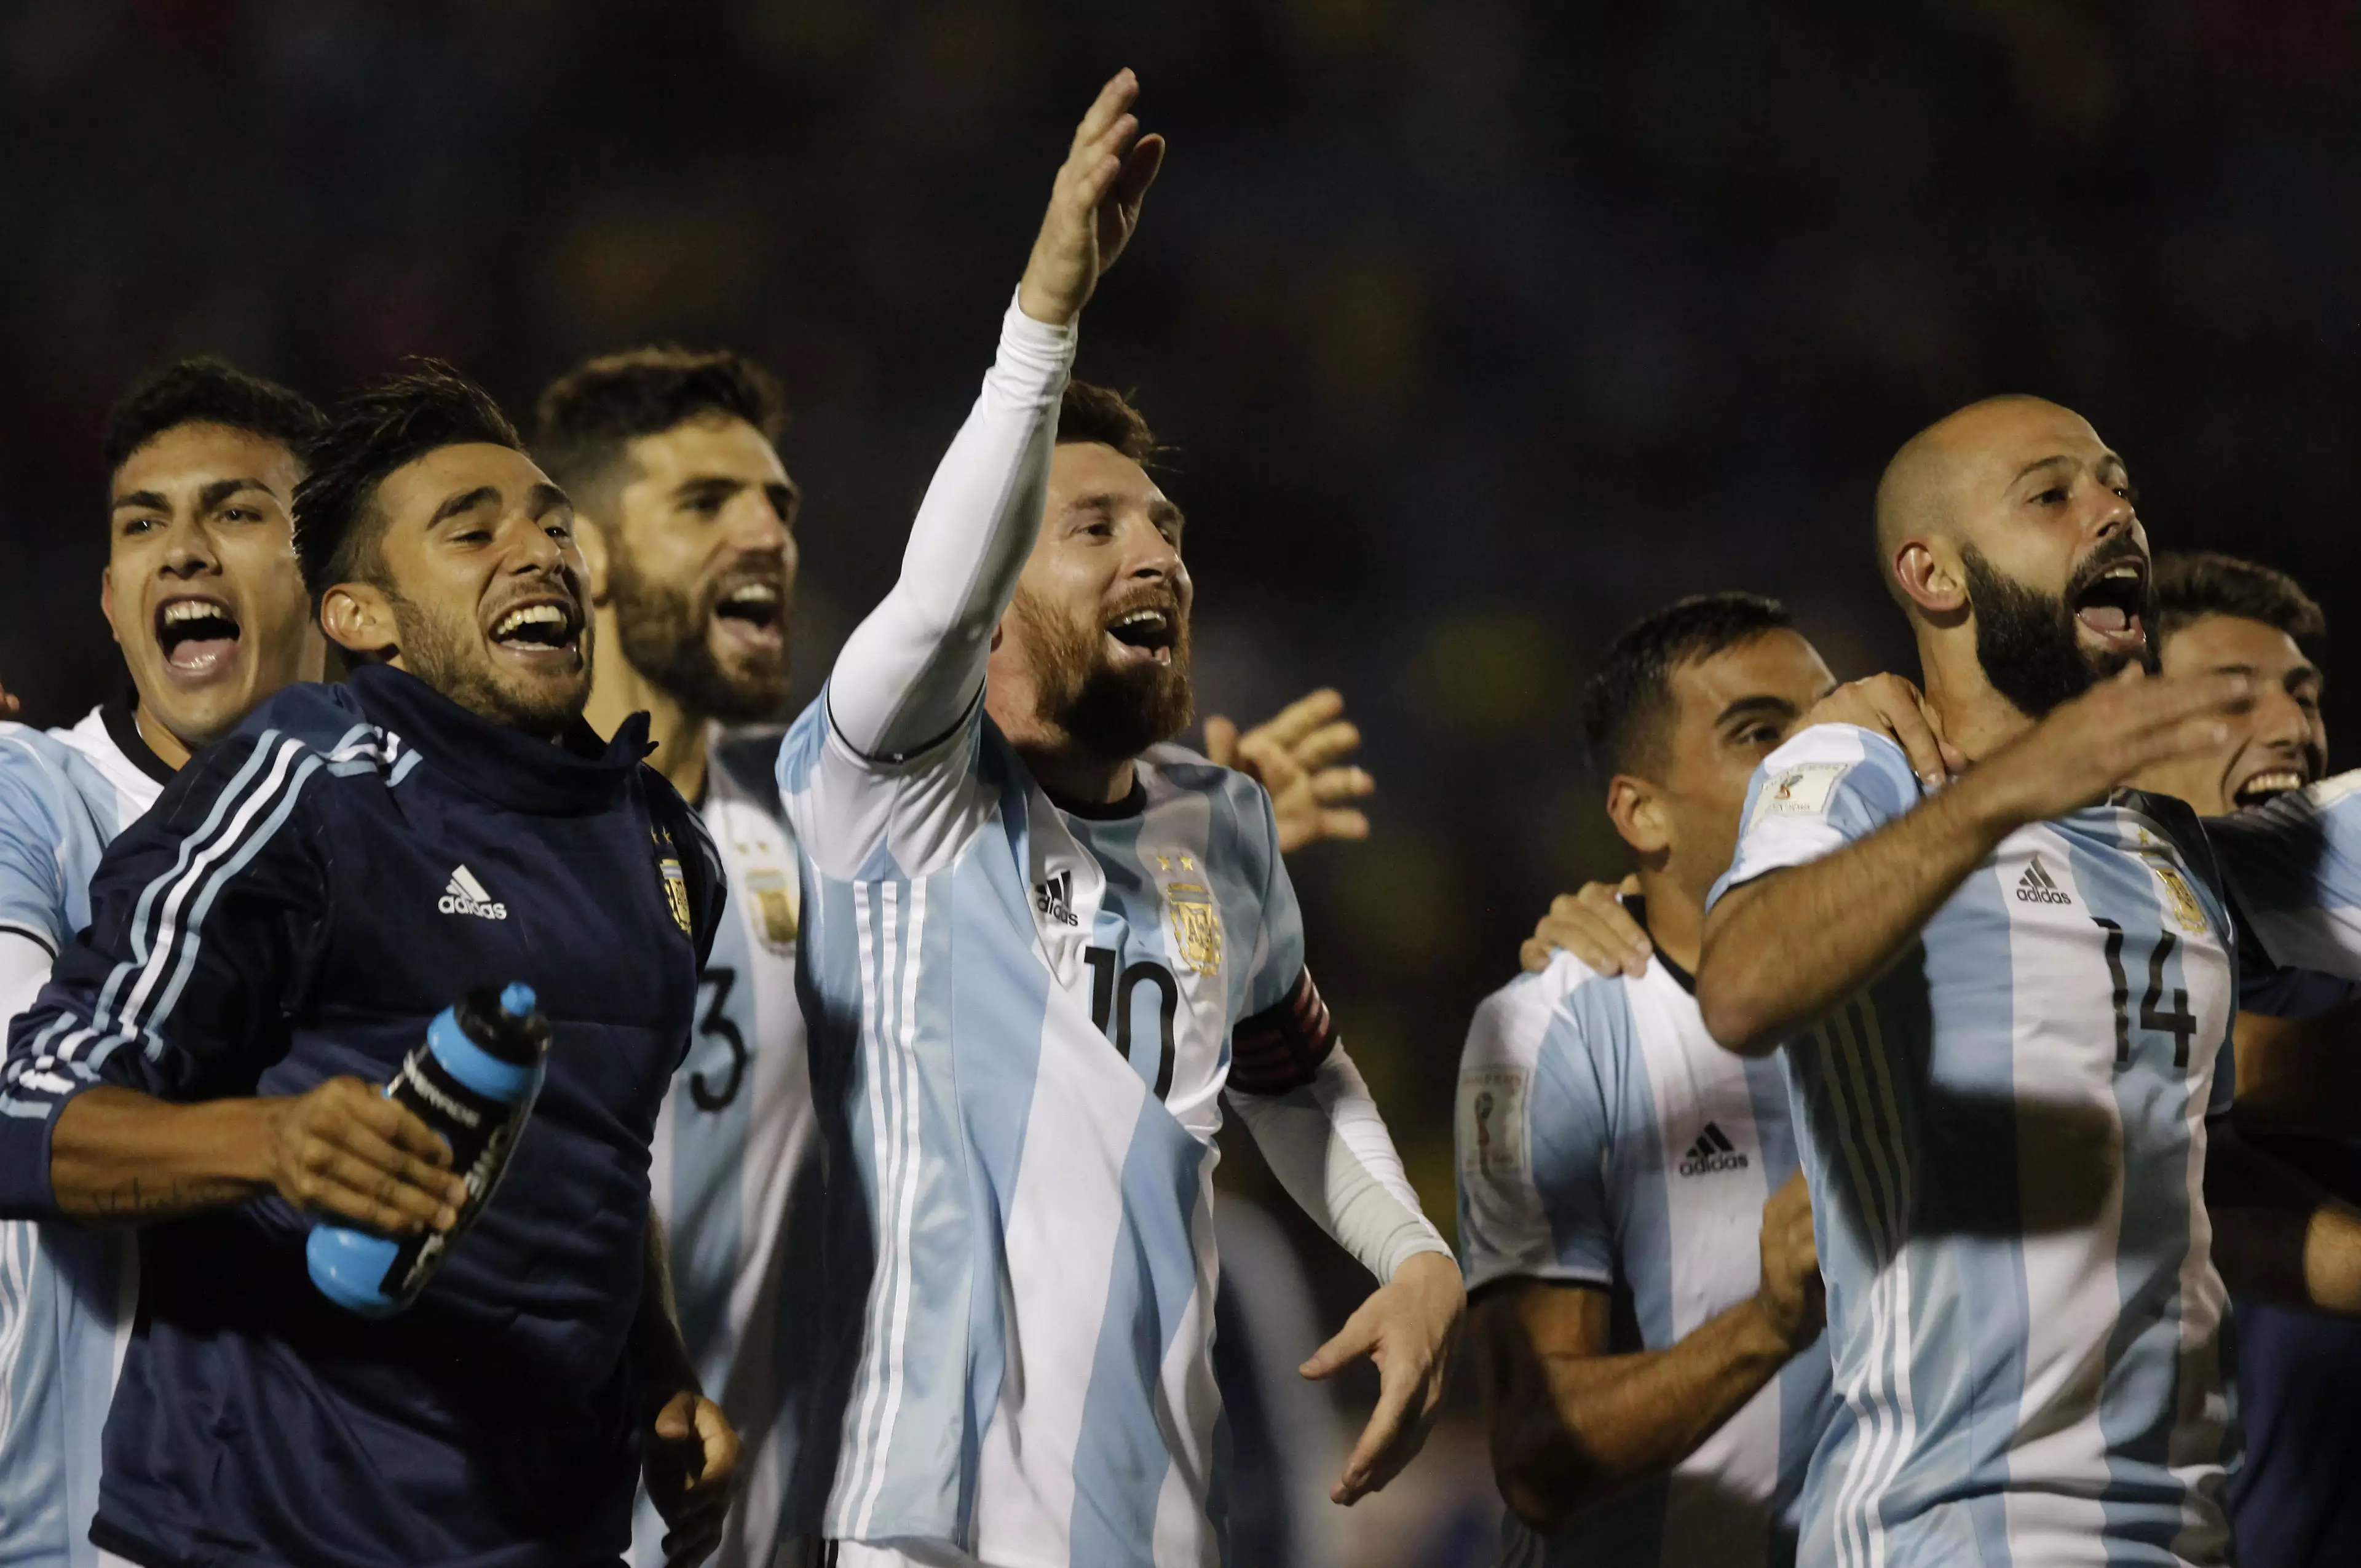 Argentina celebrate after Messi's one man mission to get them to the World Cup. Image: PA Images